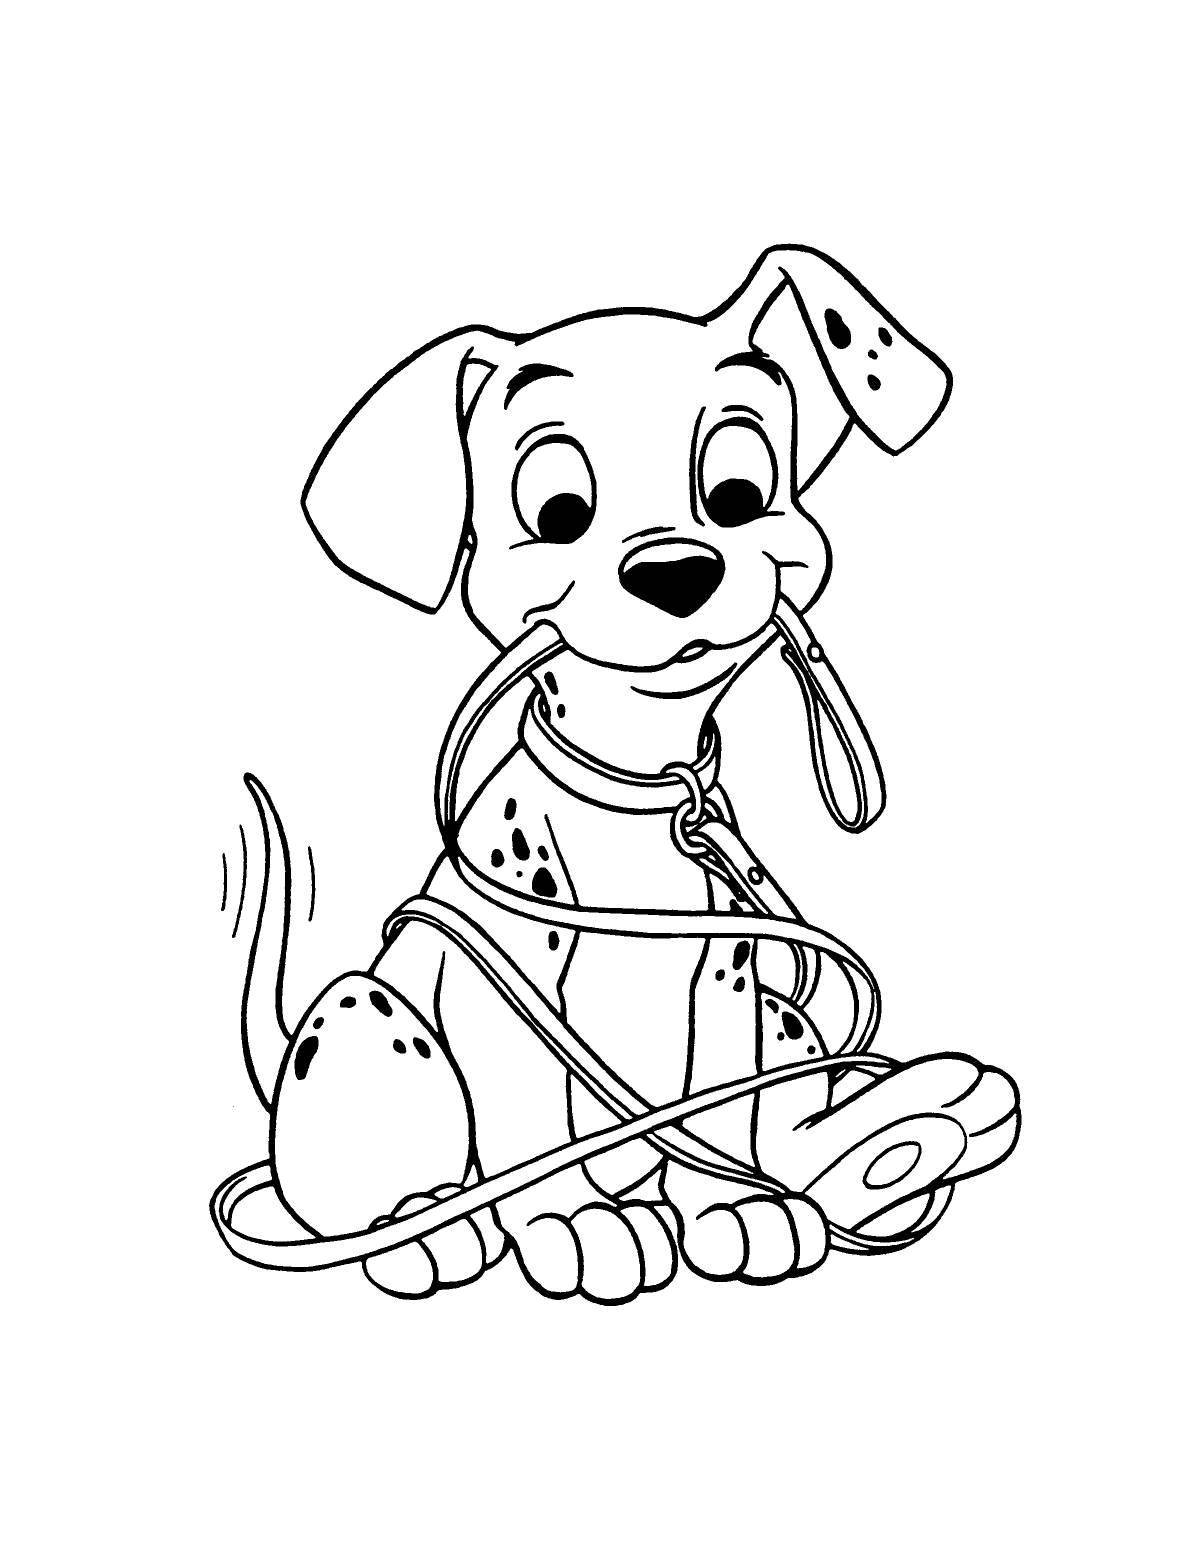 Funny dog ​​coloring book for 5-6 year olds